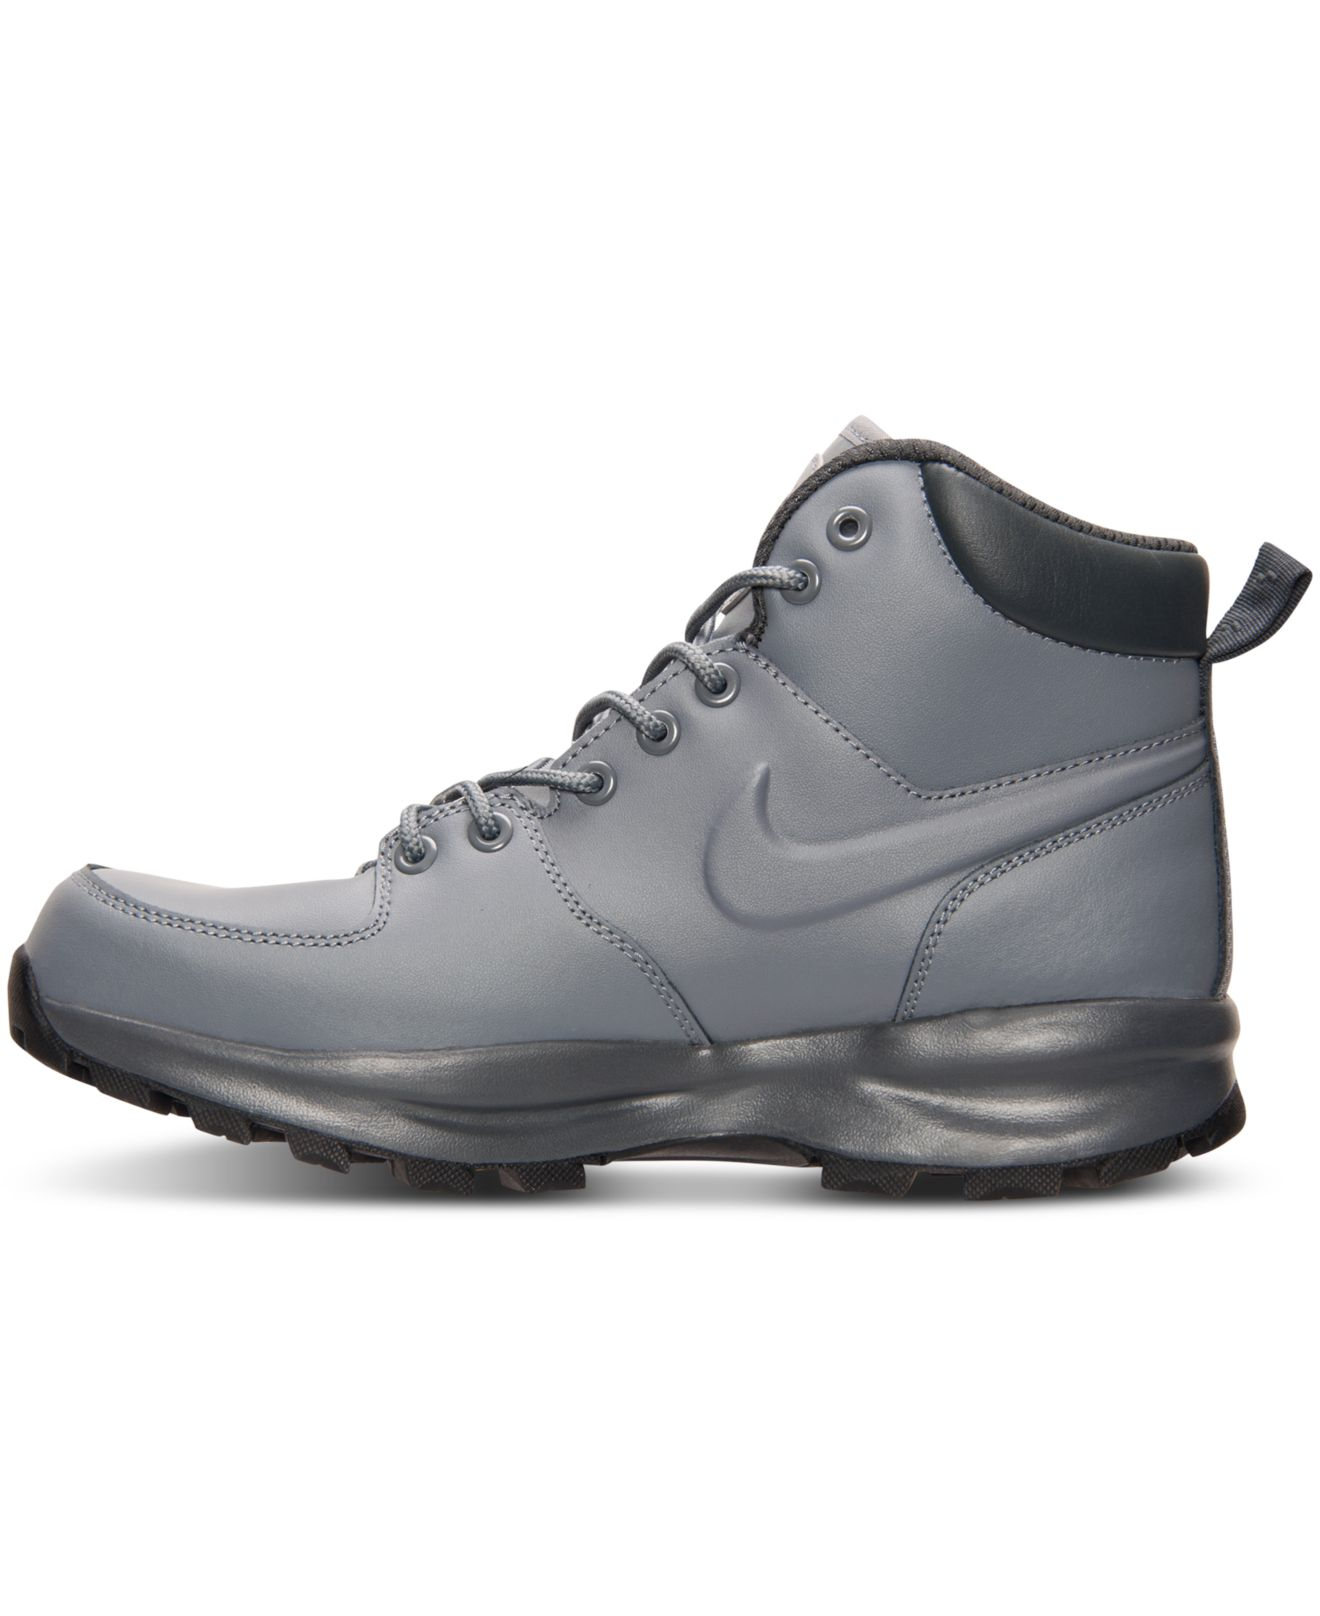 Nike Men's Manoa Leather Boots From Finish Line in Gray for Men - Lyst